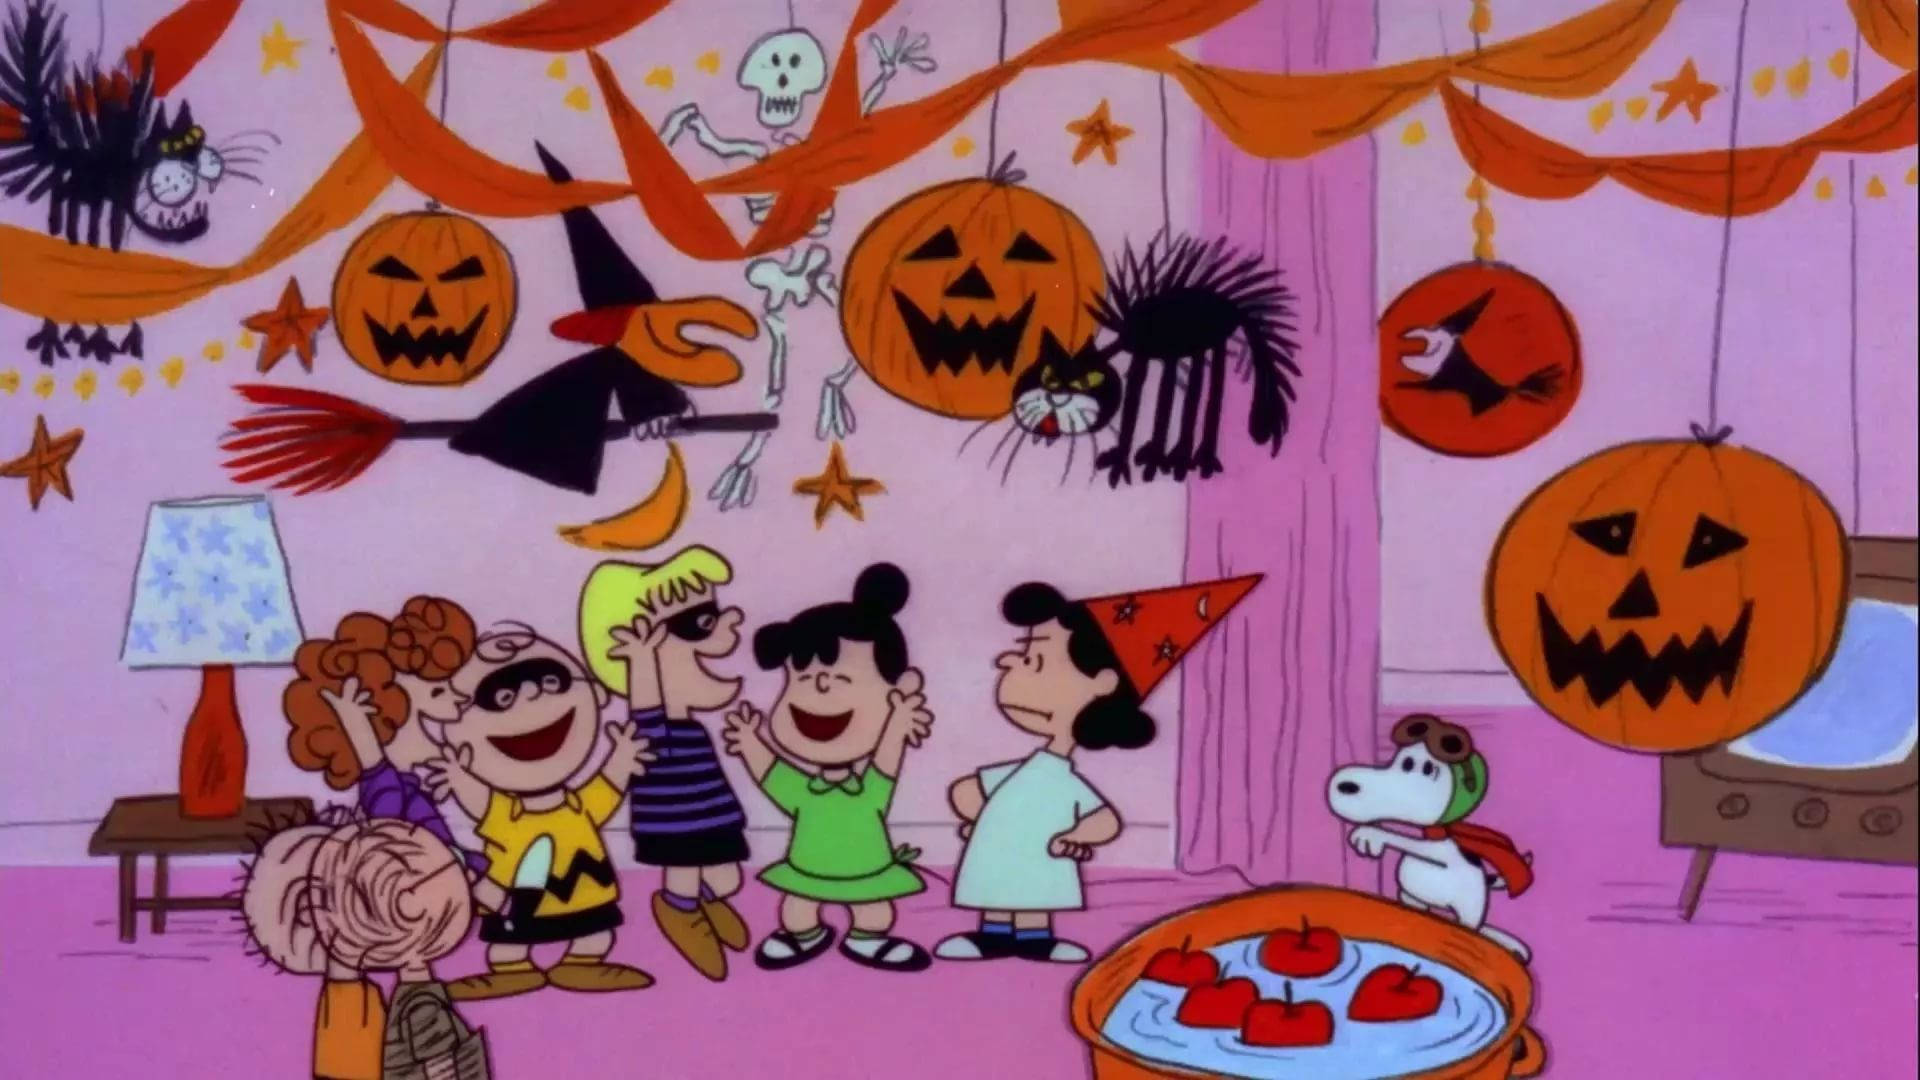 Cute Aesthetic Halloween Peanuts Party Background